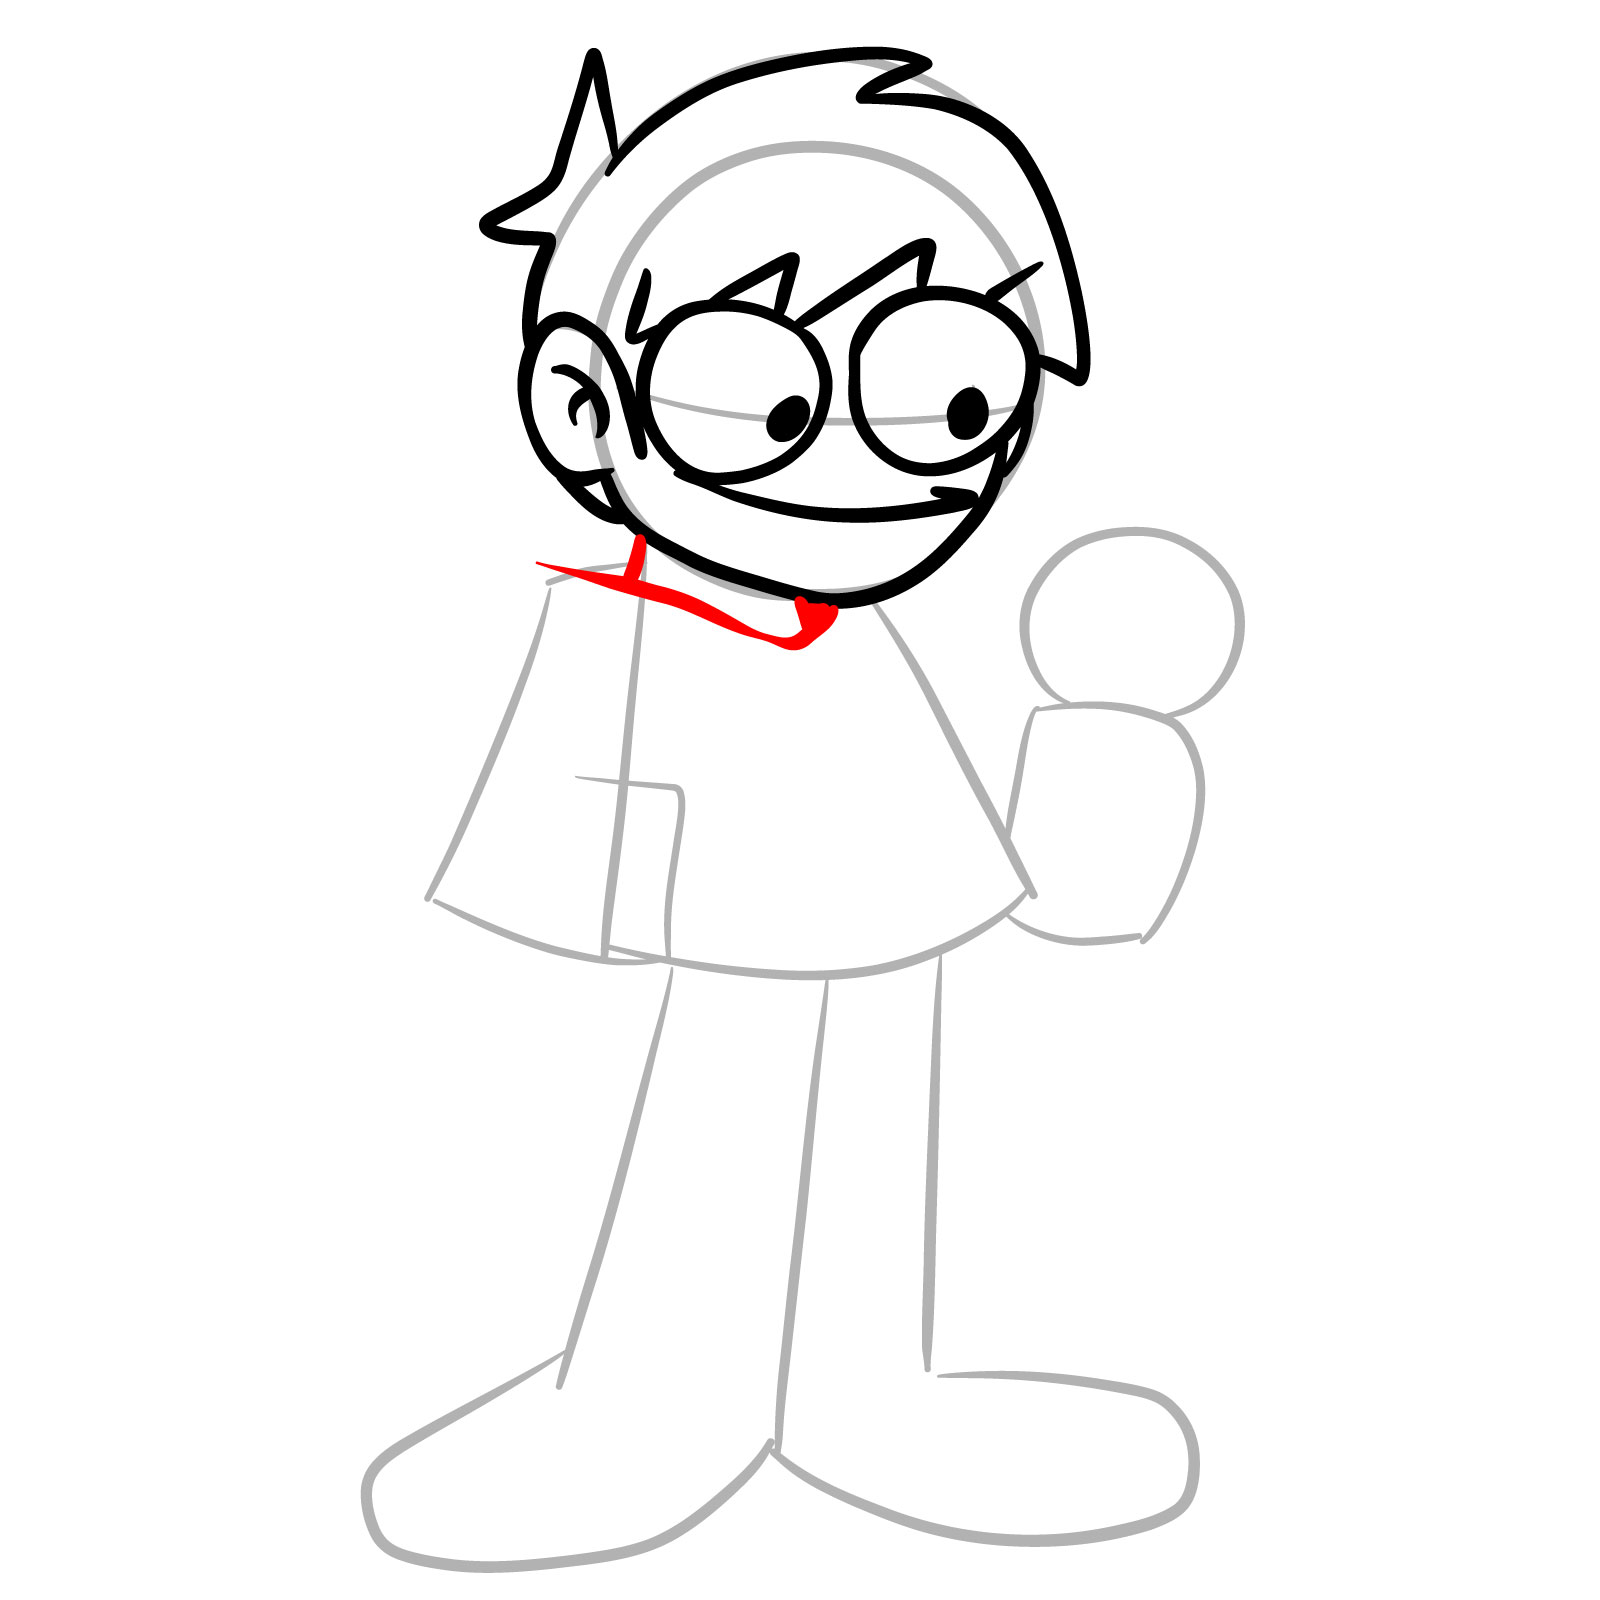 How to draw Edd from Online Vs - step 11